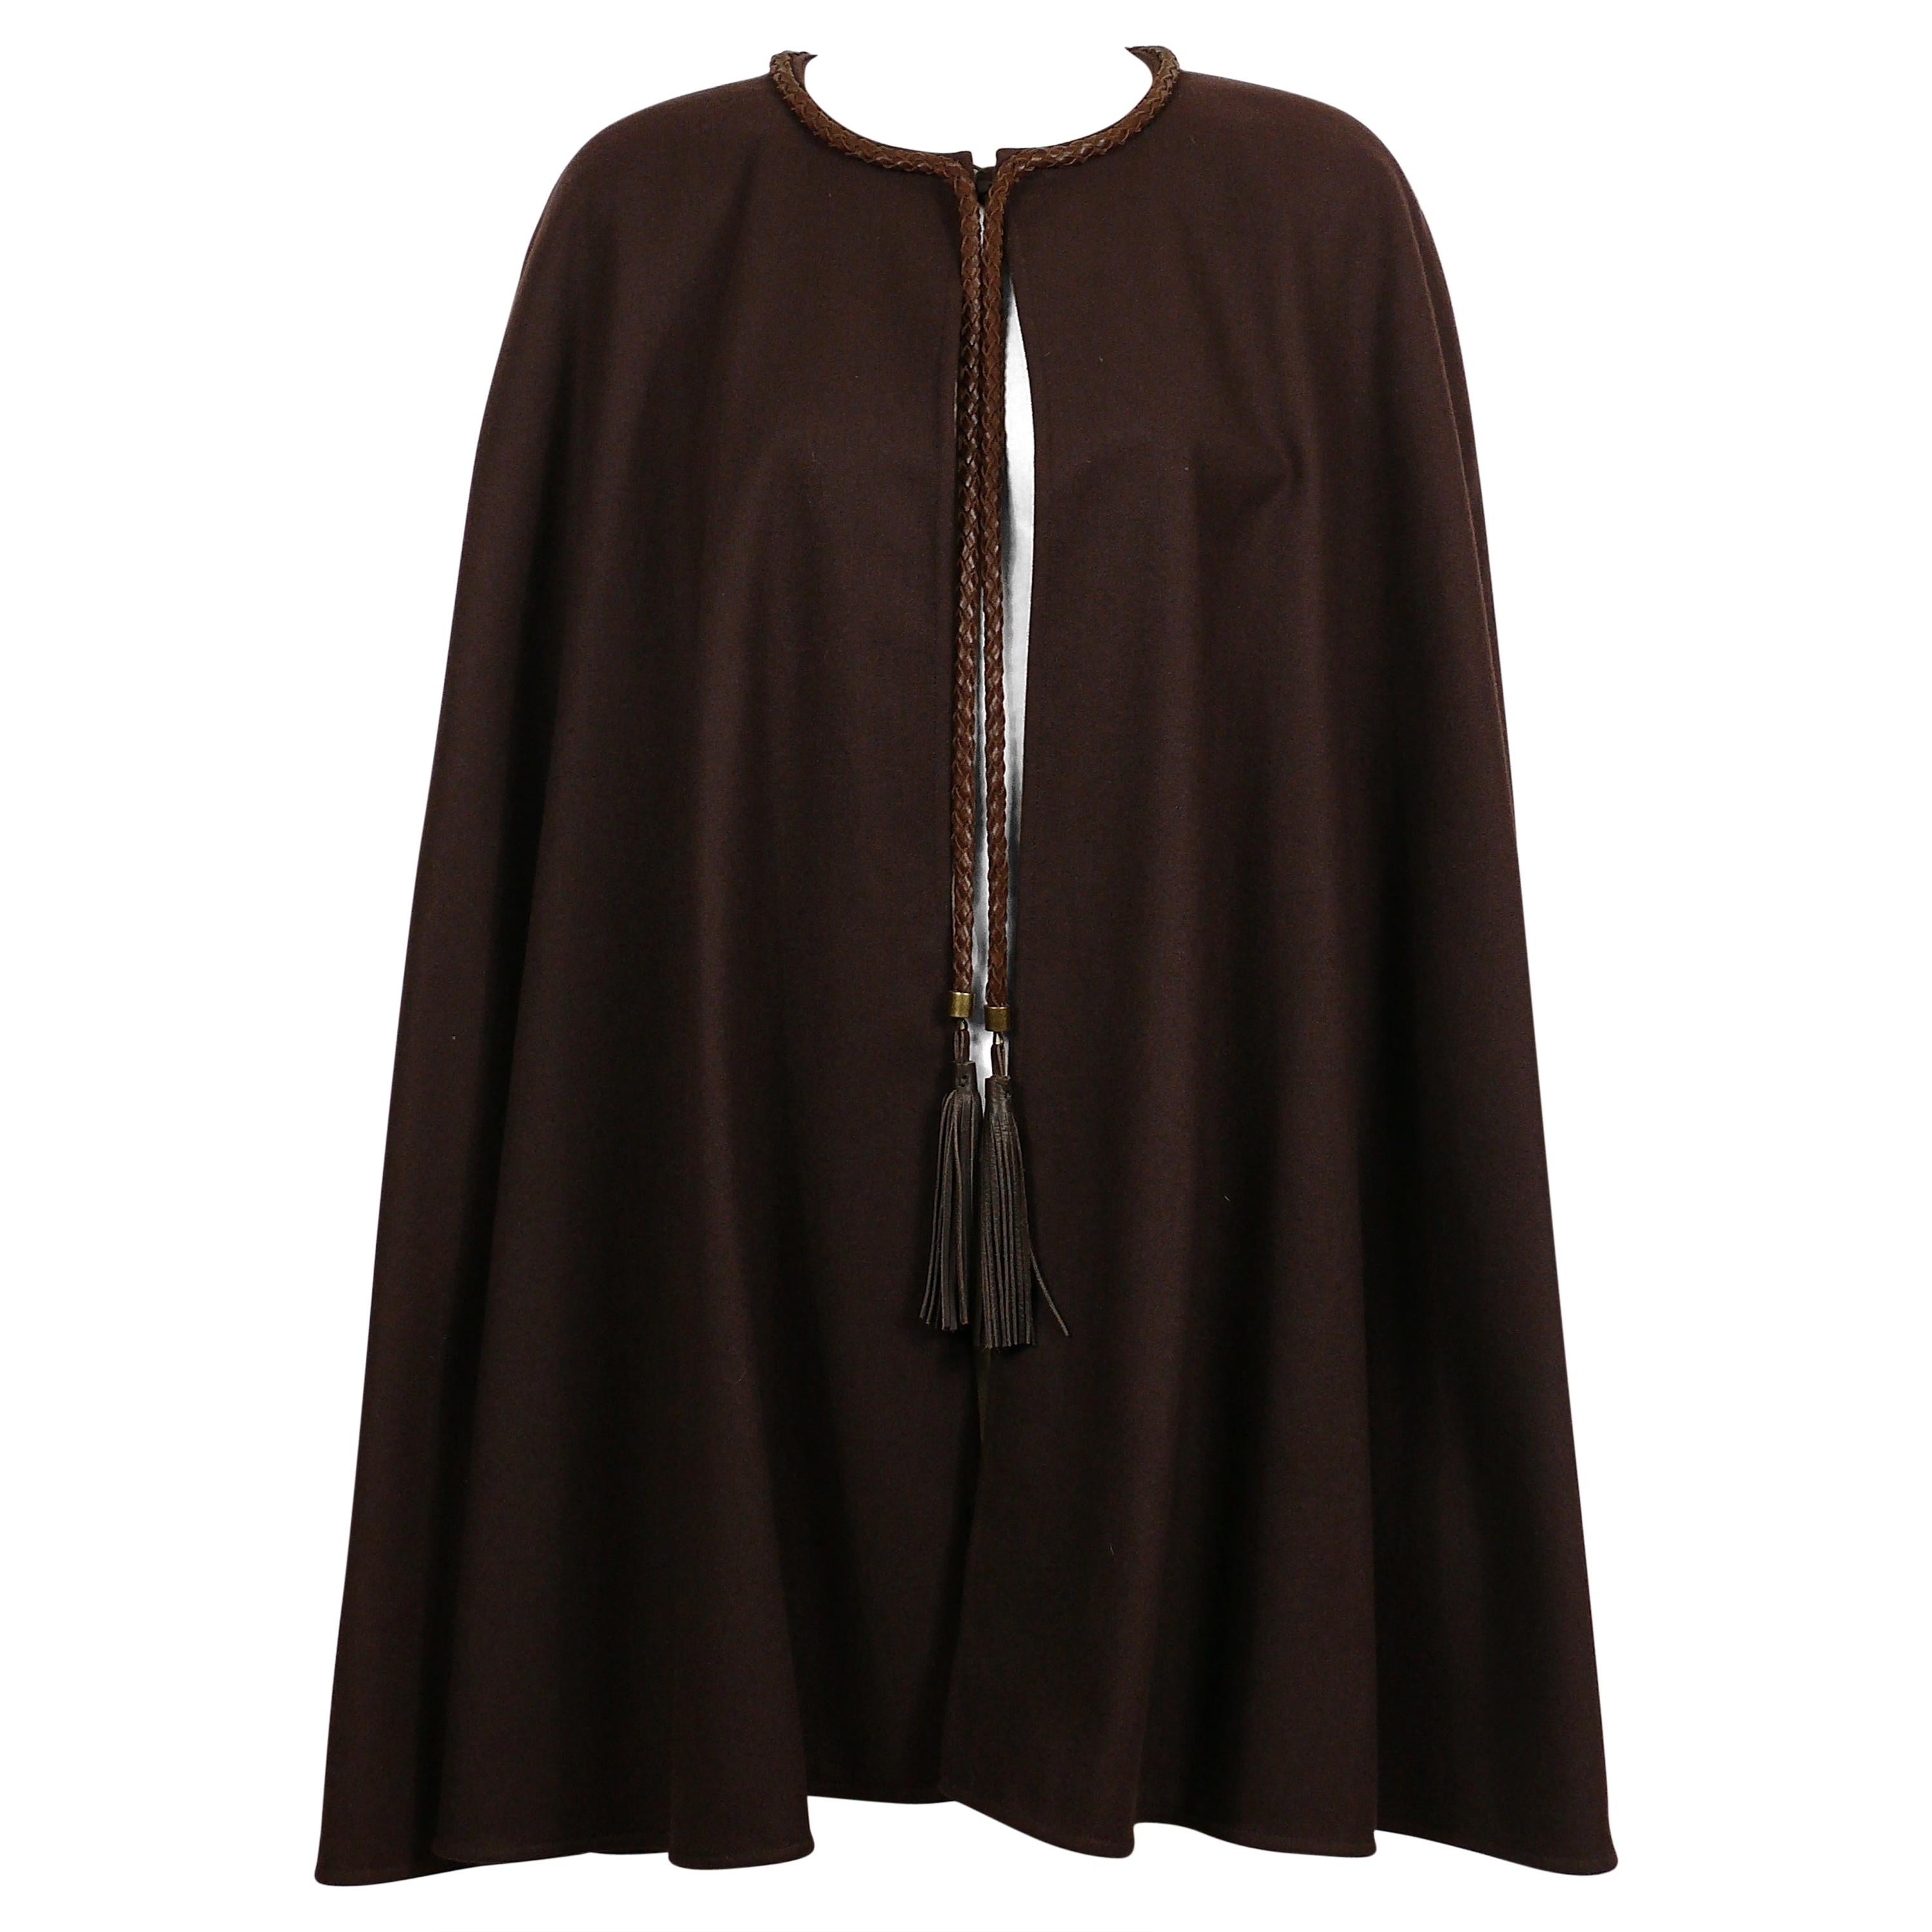 Yves Saint Laurent Rive Gauche Vintage Brown Cape with Leather Tassels